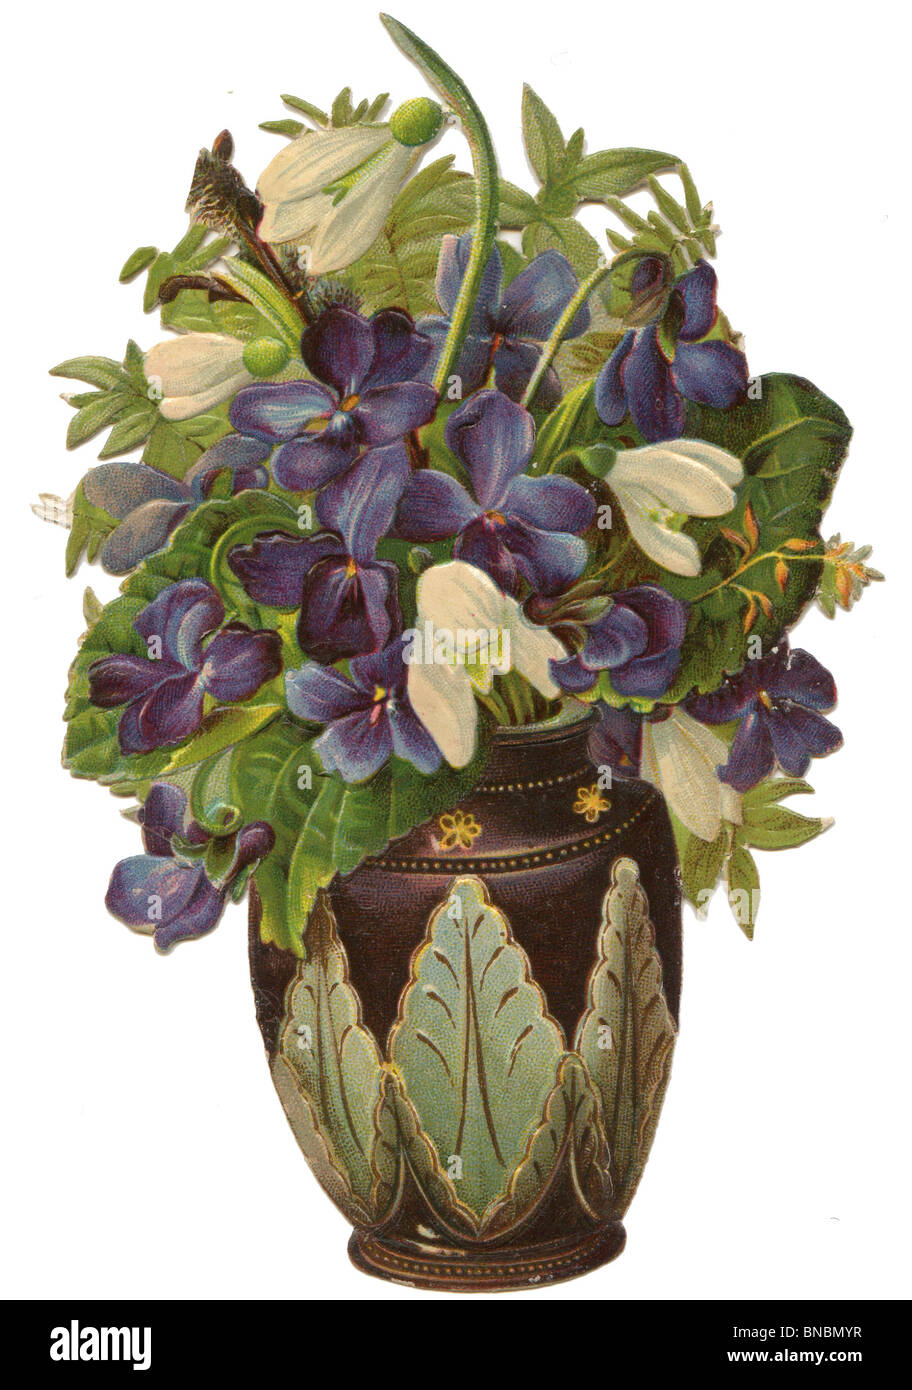 Snowdrops and Violets in a Decorative Vase Stock Photo